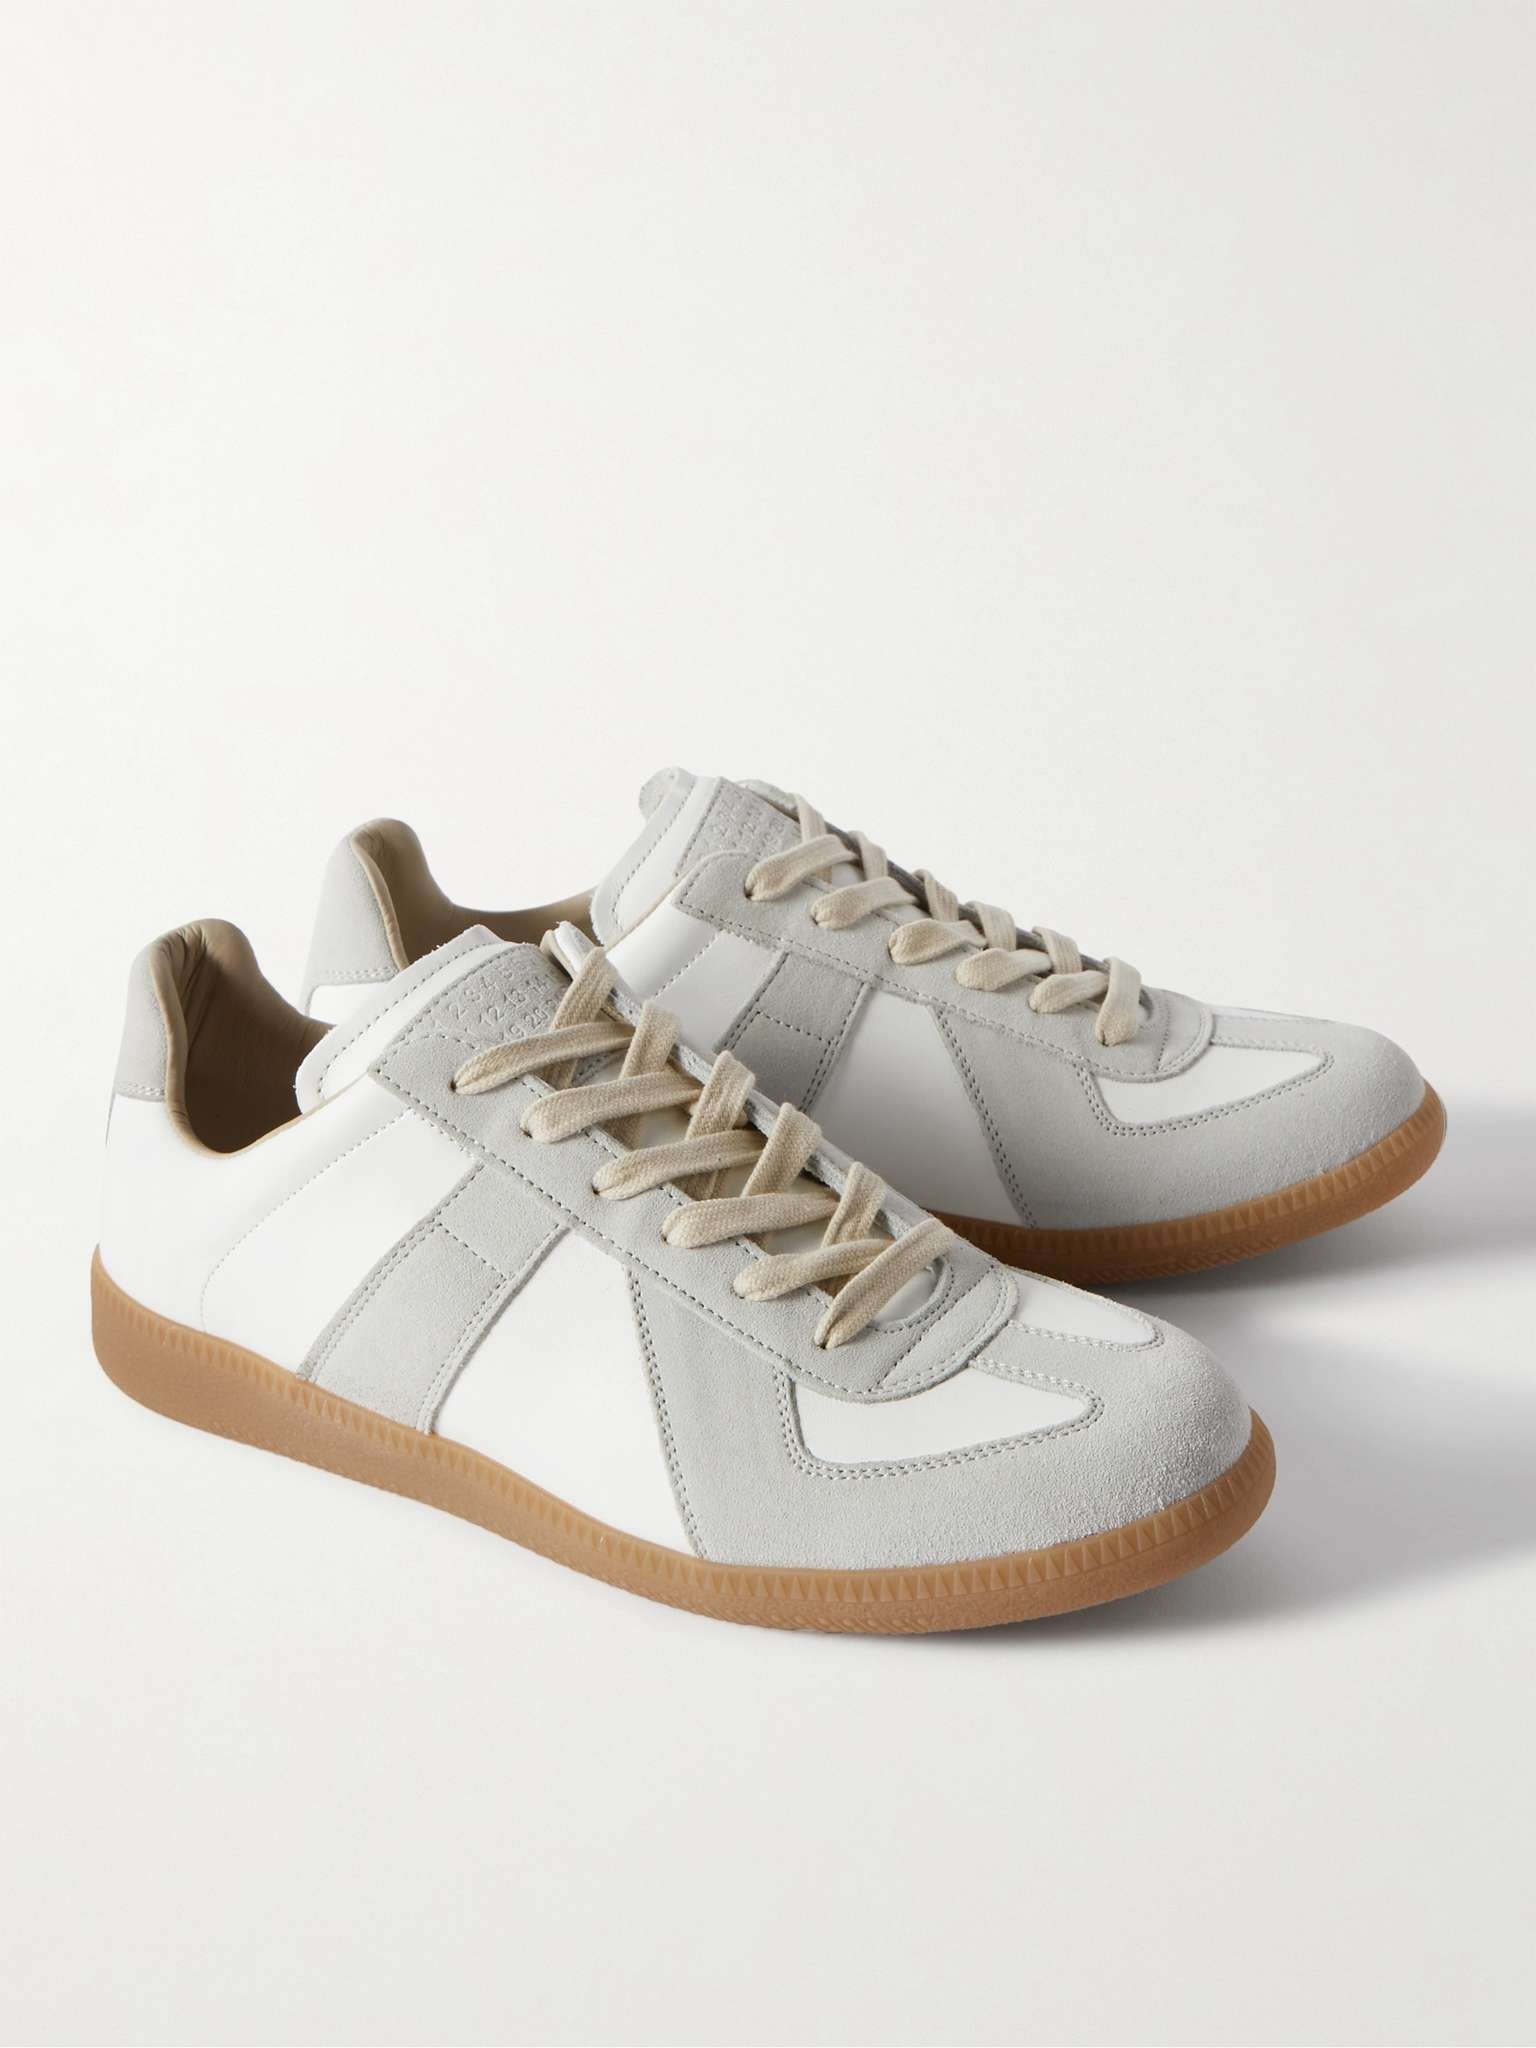 Replica Leather and Suede Sneakers - 2